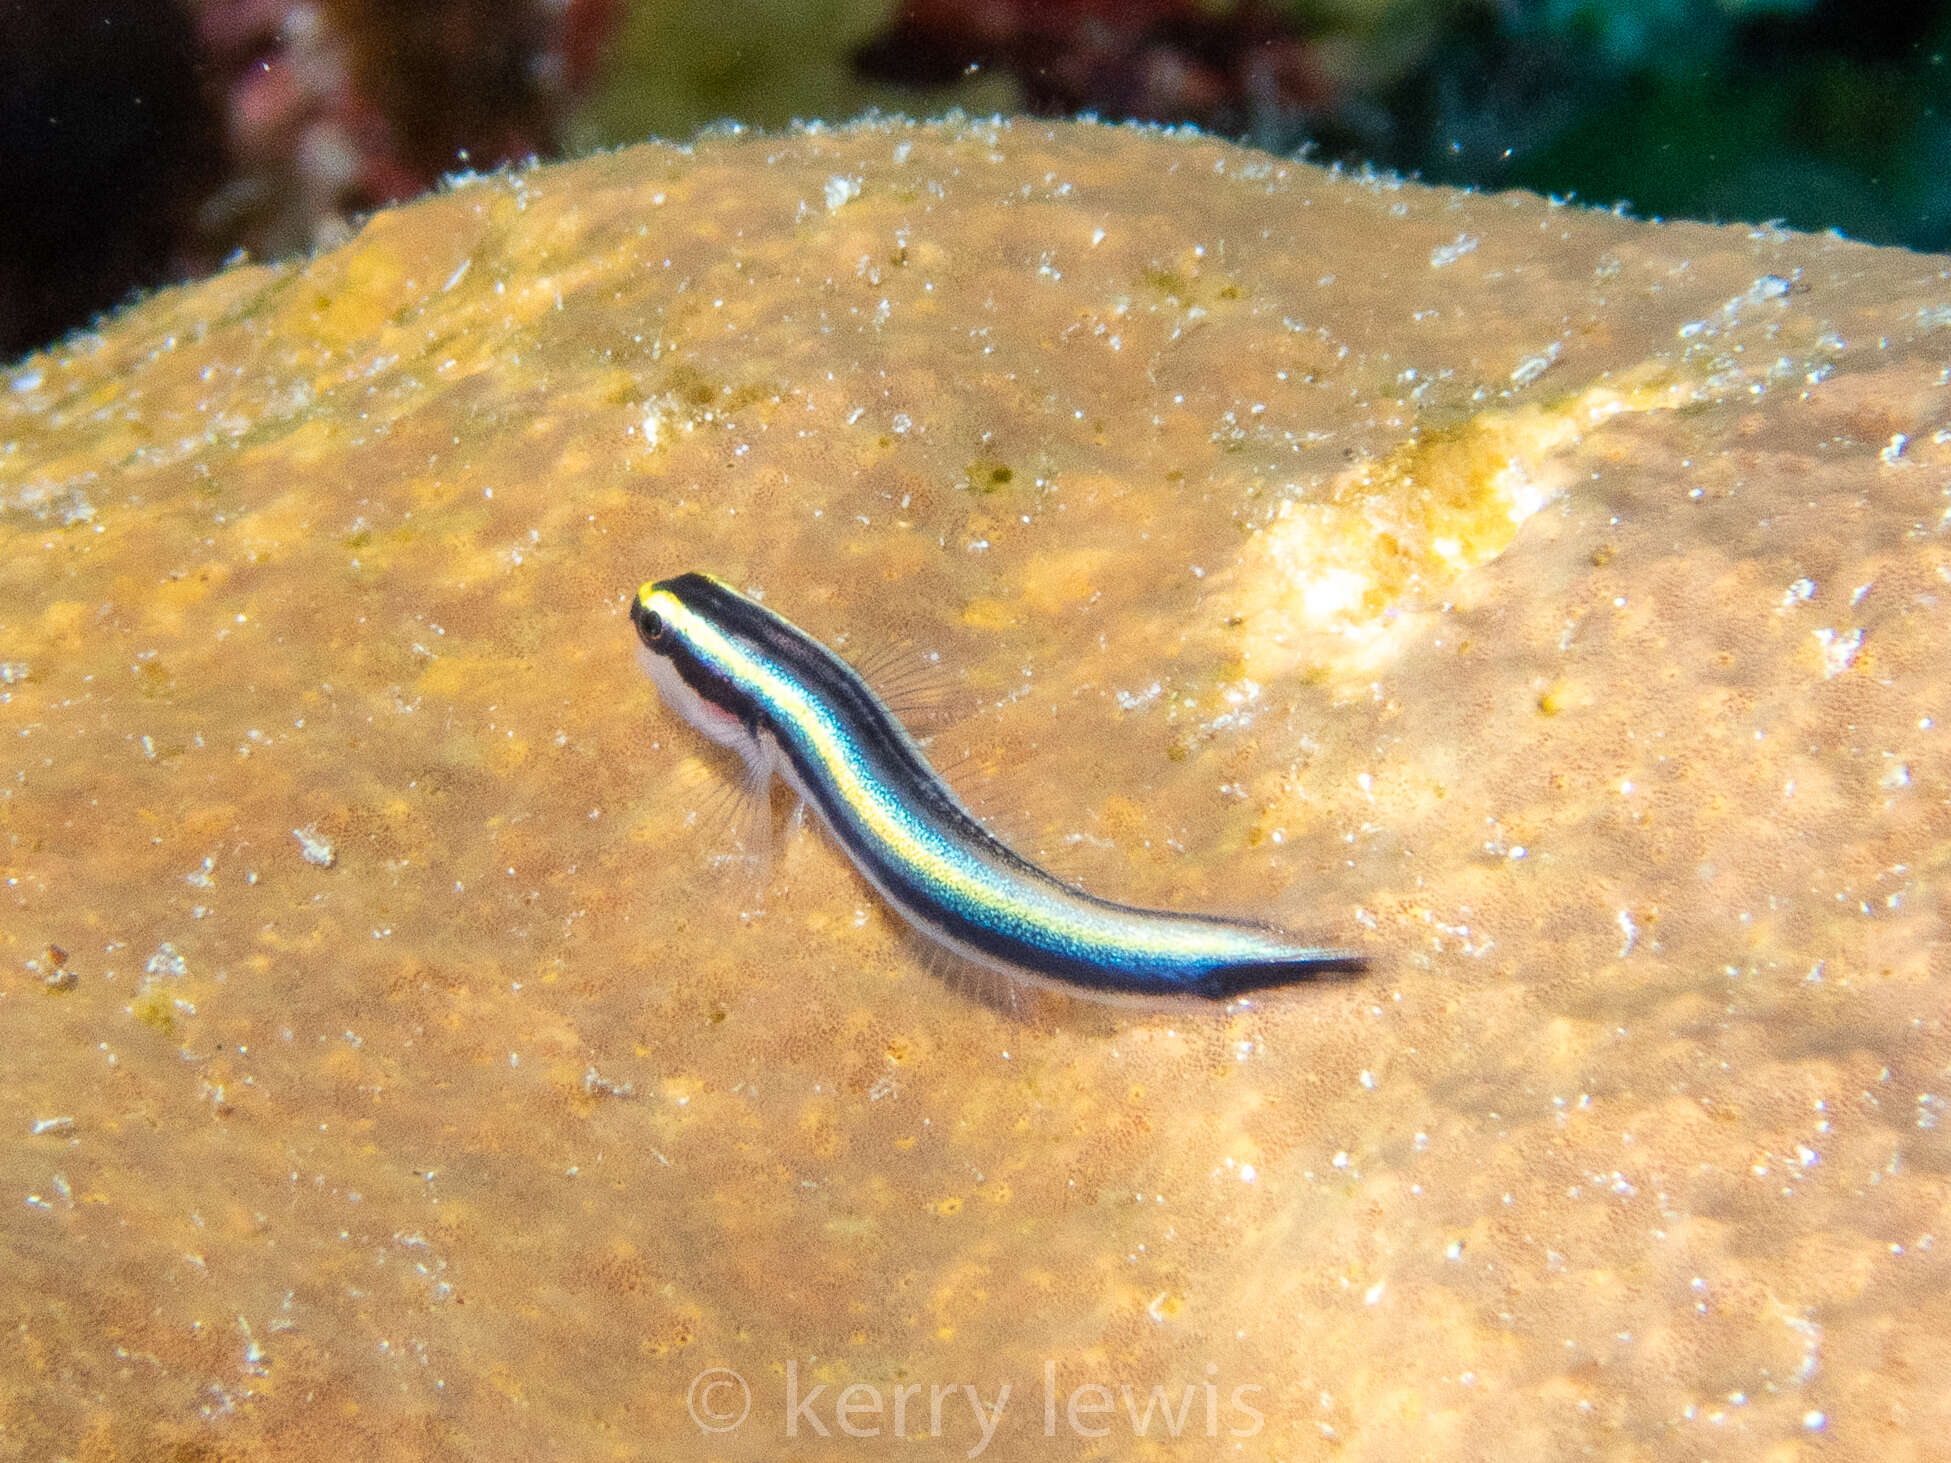 Image of Cayman cleaner goby